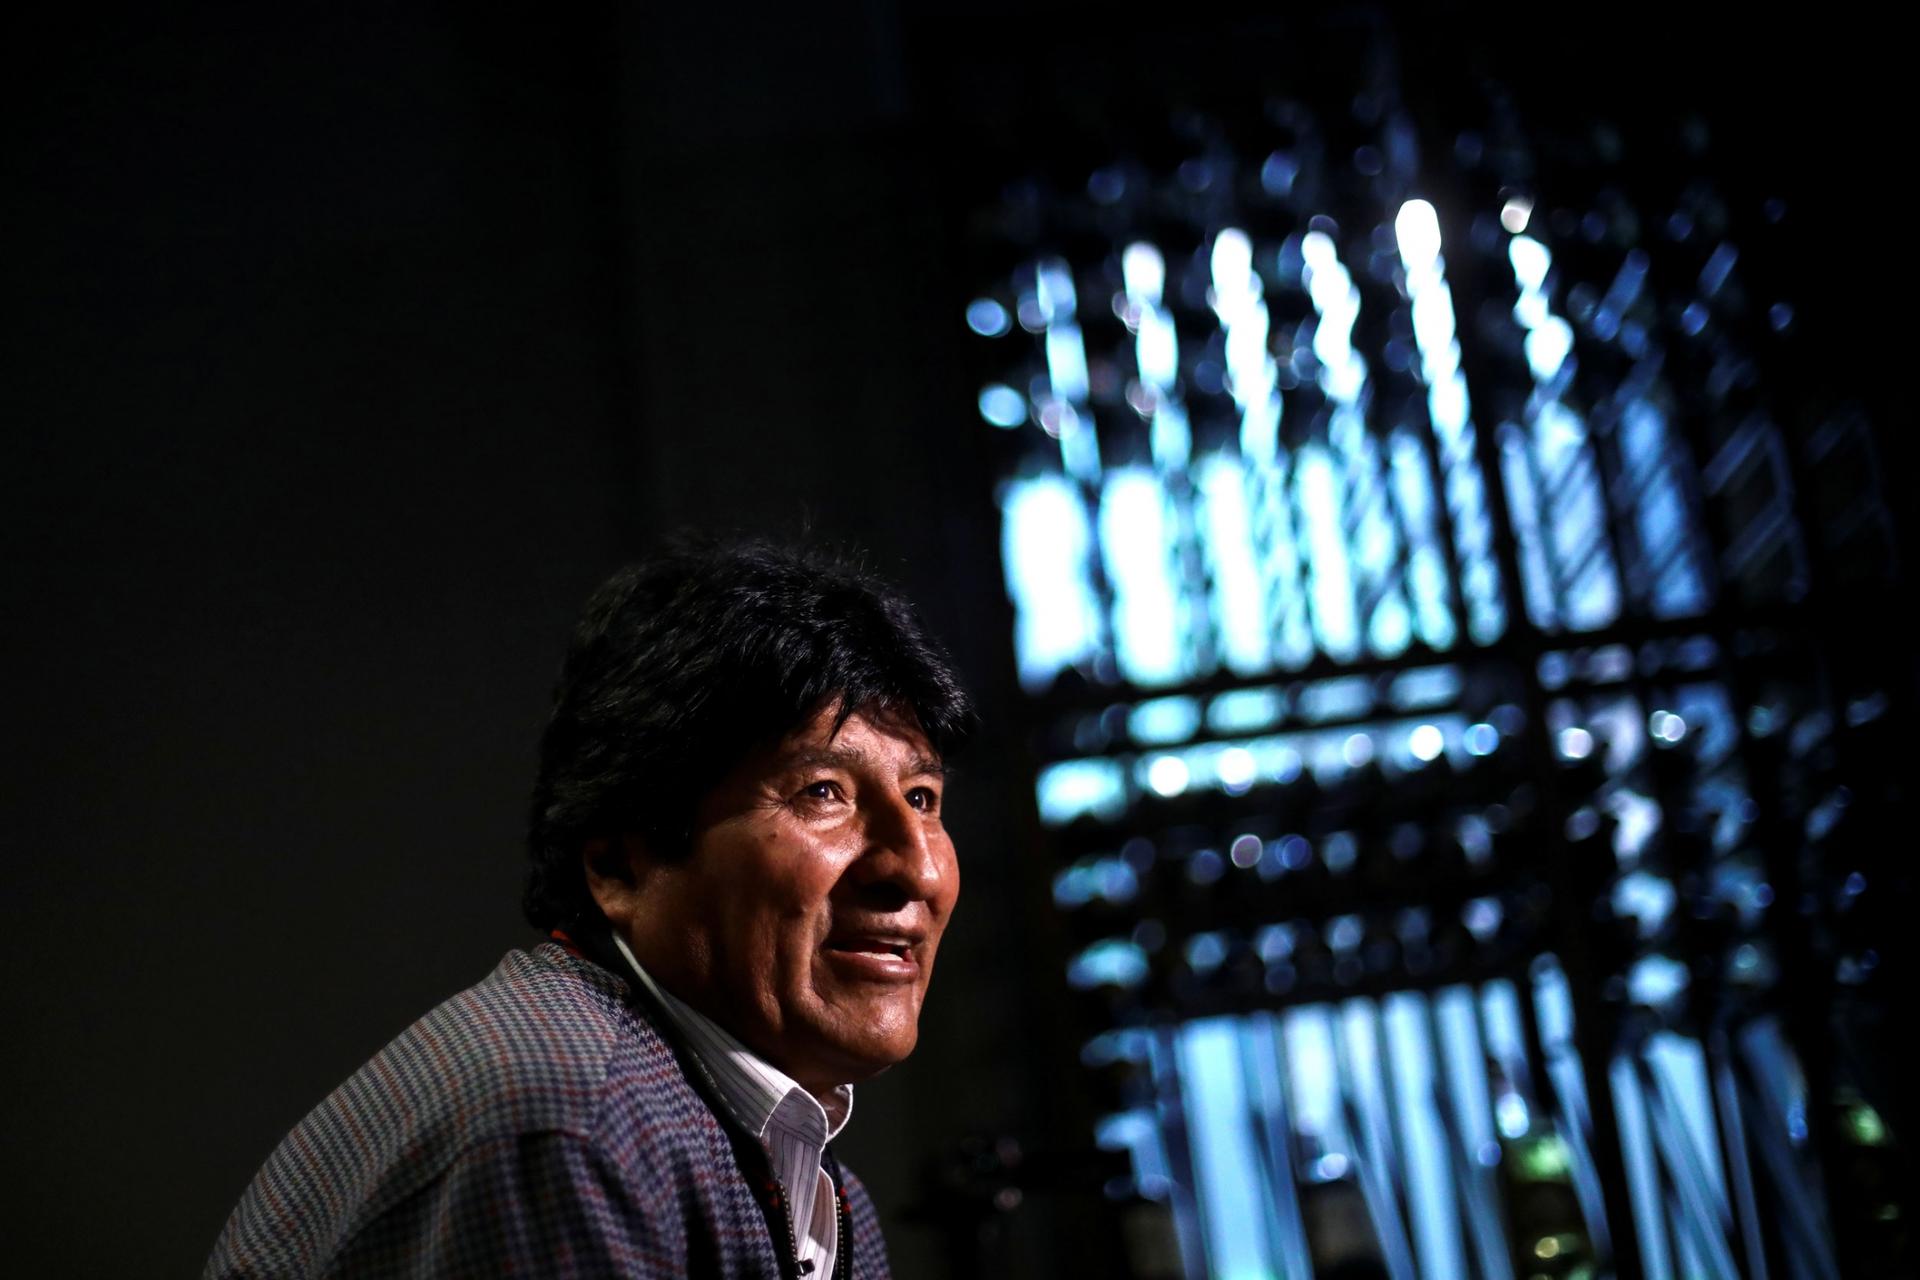 Former Bolivian President Evo Morales is shown wearing a jacket with light streaming through a window in the distance.